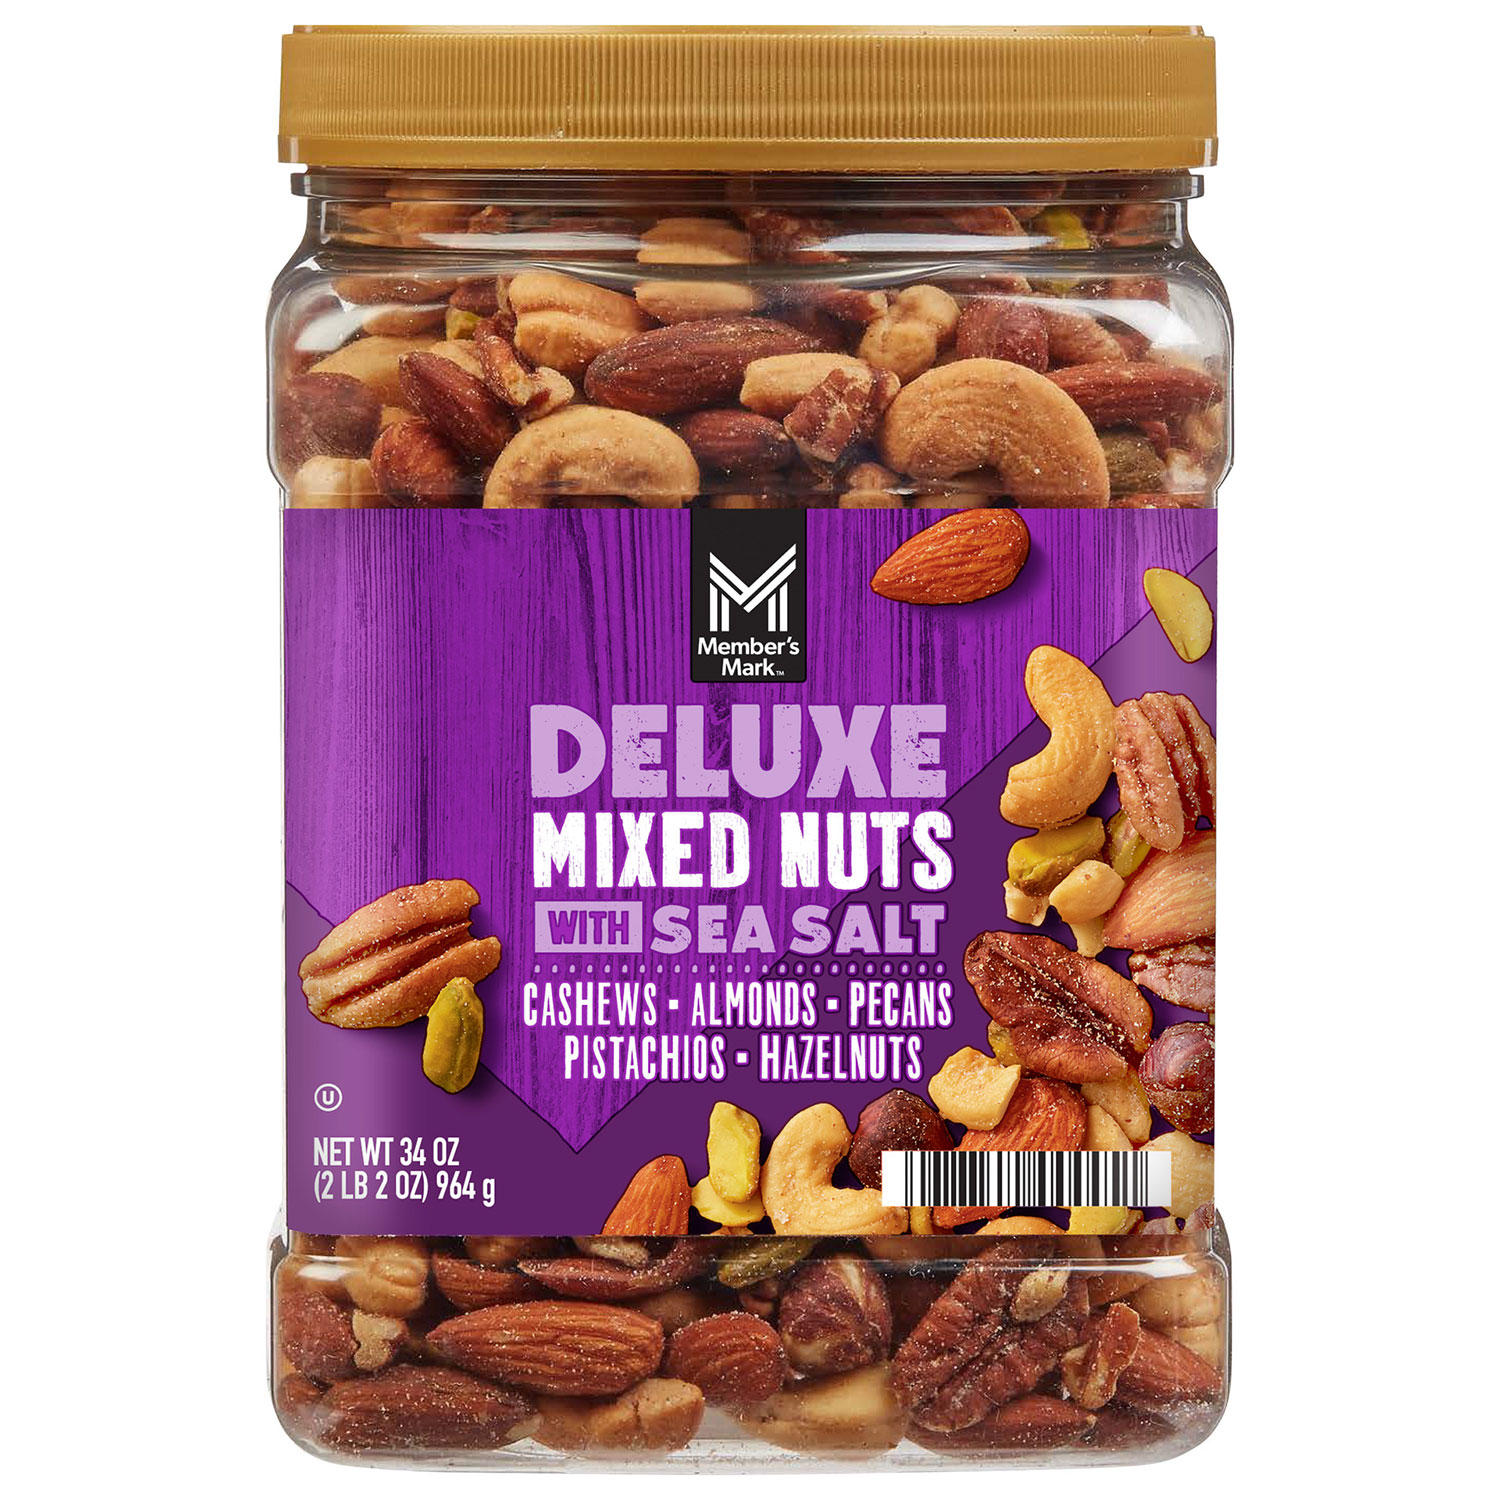 Member's Mark Deluxe Mixed Nuts with Sea Salt 34 oz.